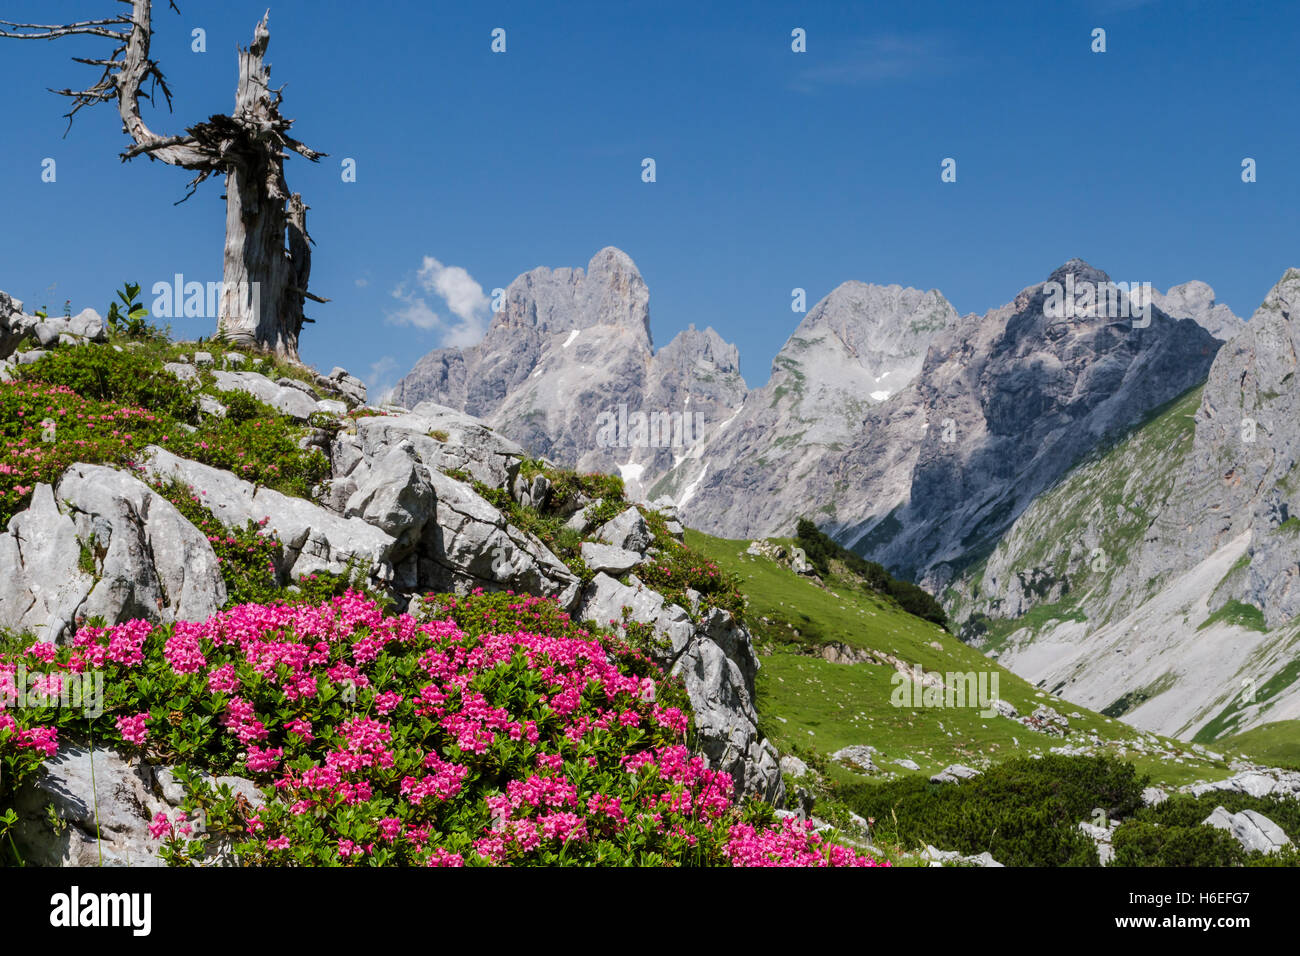 Alpine roses flower on an high alpine meadow in front of a mountainous background. Stock Photo